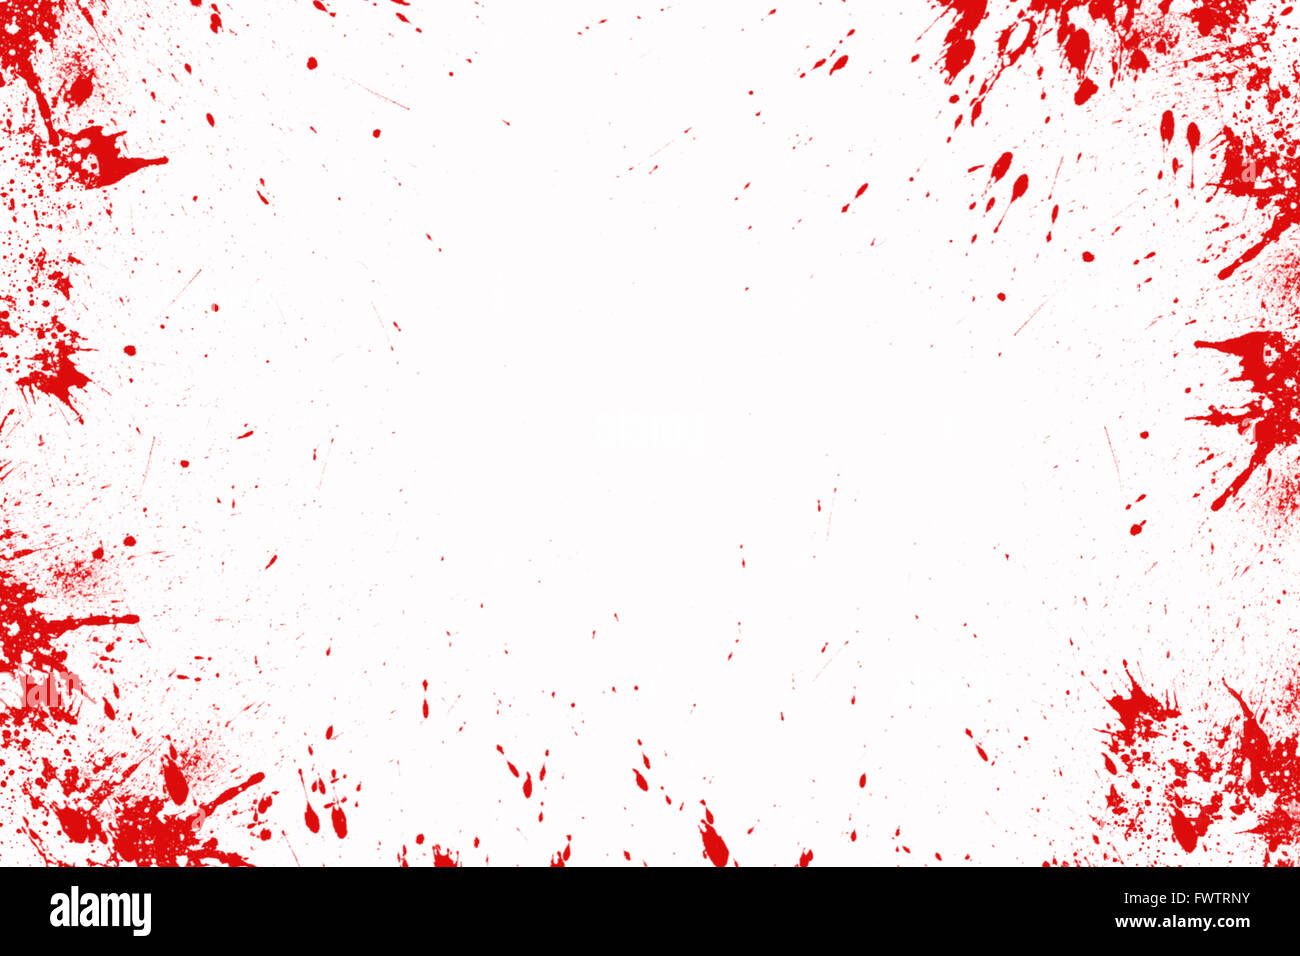 Blood splatter in front of a white background, Halloween Stock Photo